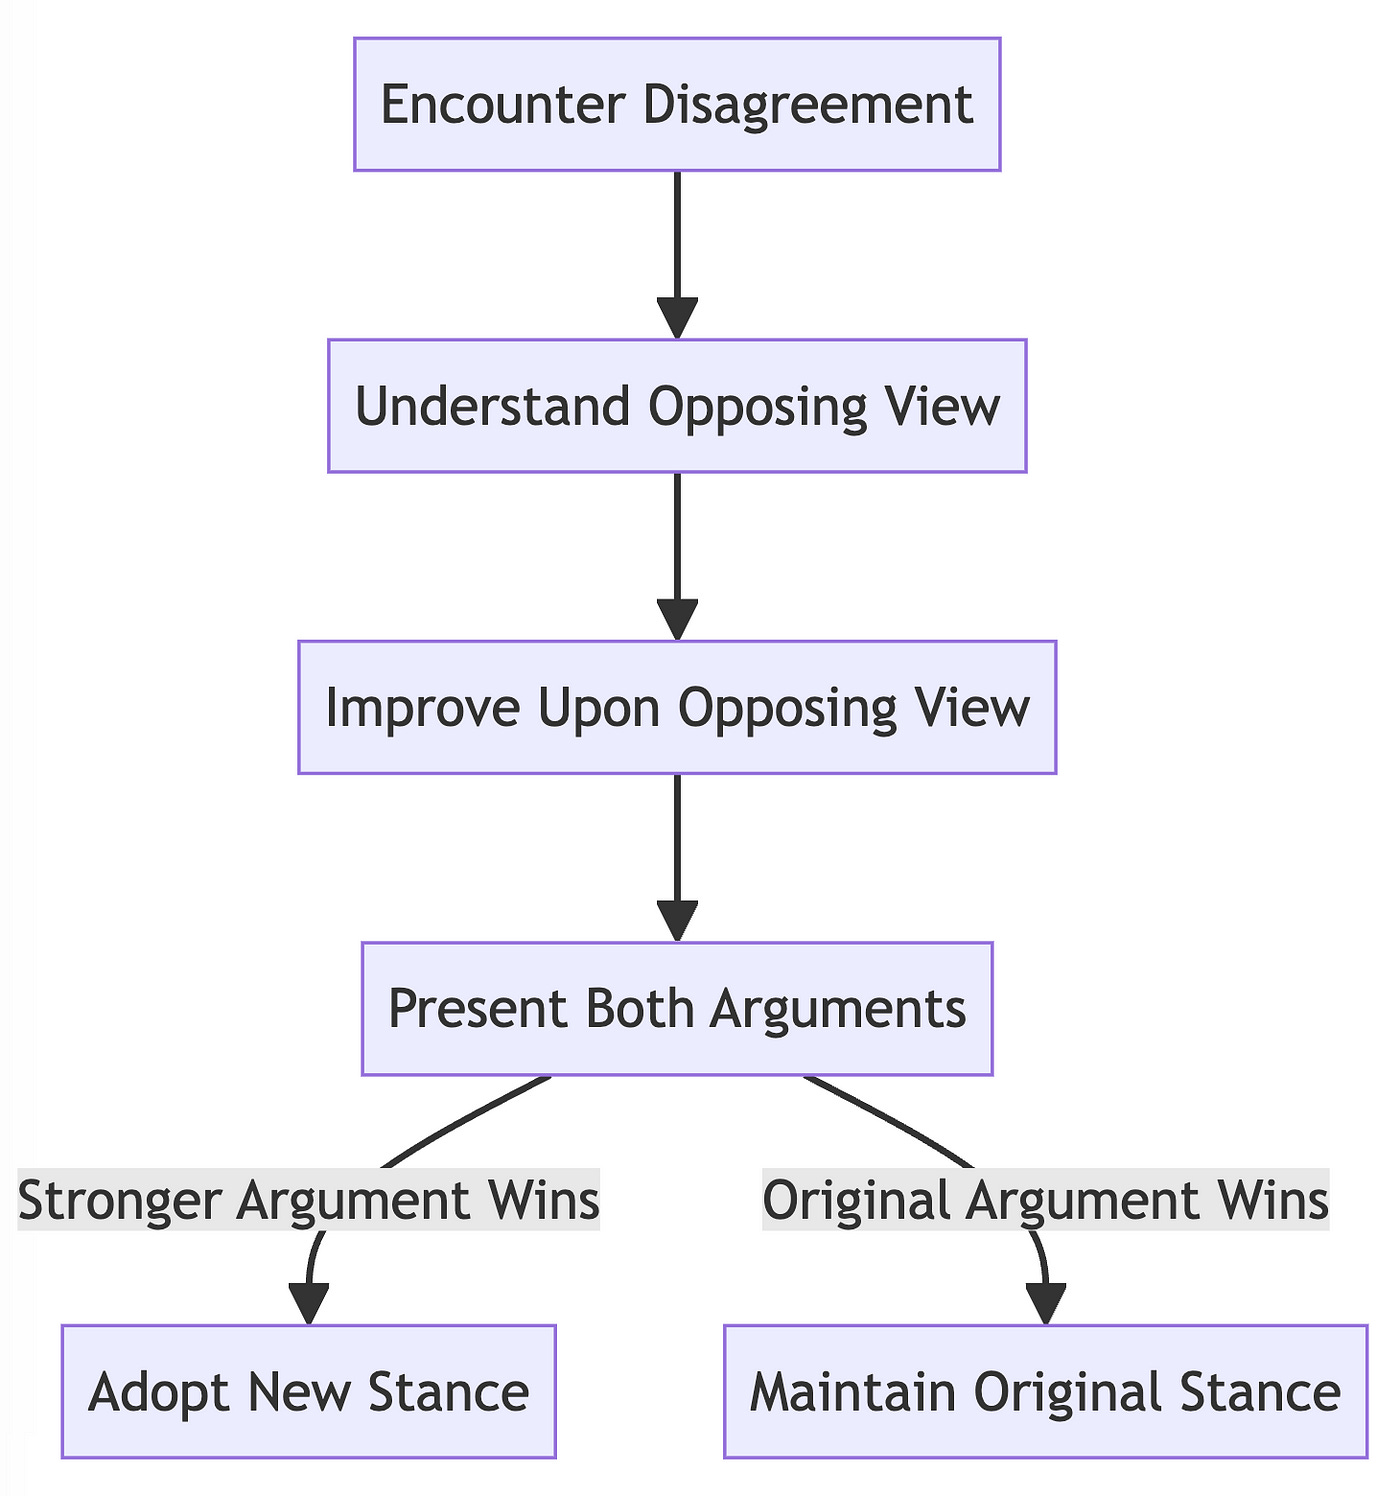 This flowchart outlines the step-by-step process of implementing the Steel Man Technique. It navigates through the process of encountering a disagreement to either adopting a new stance or maintaining the original one.